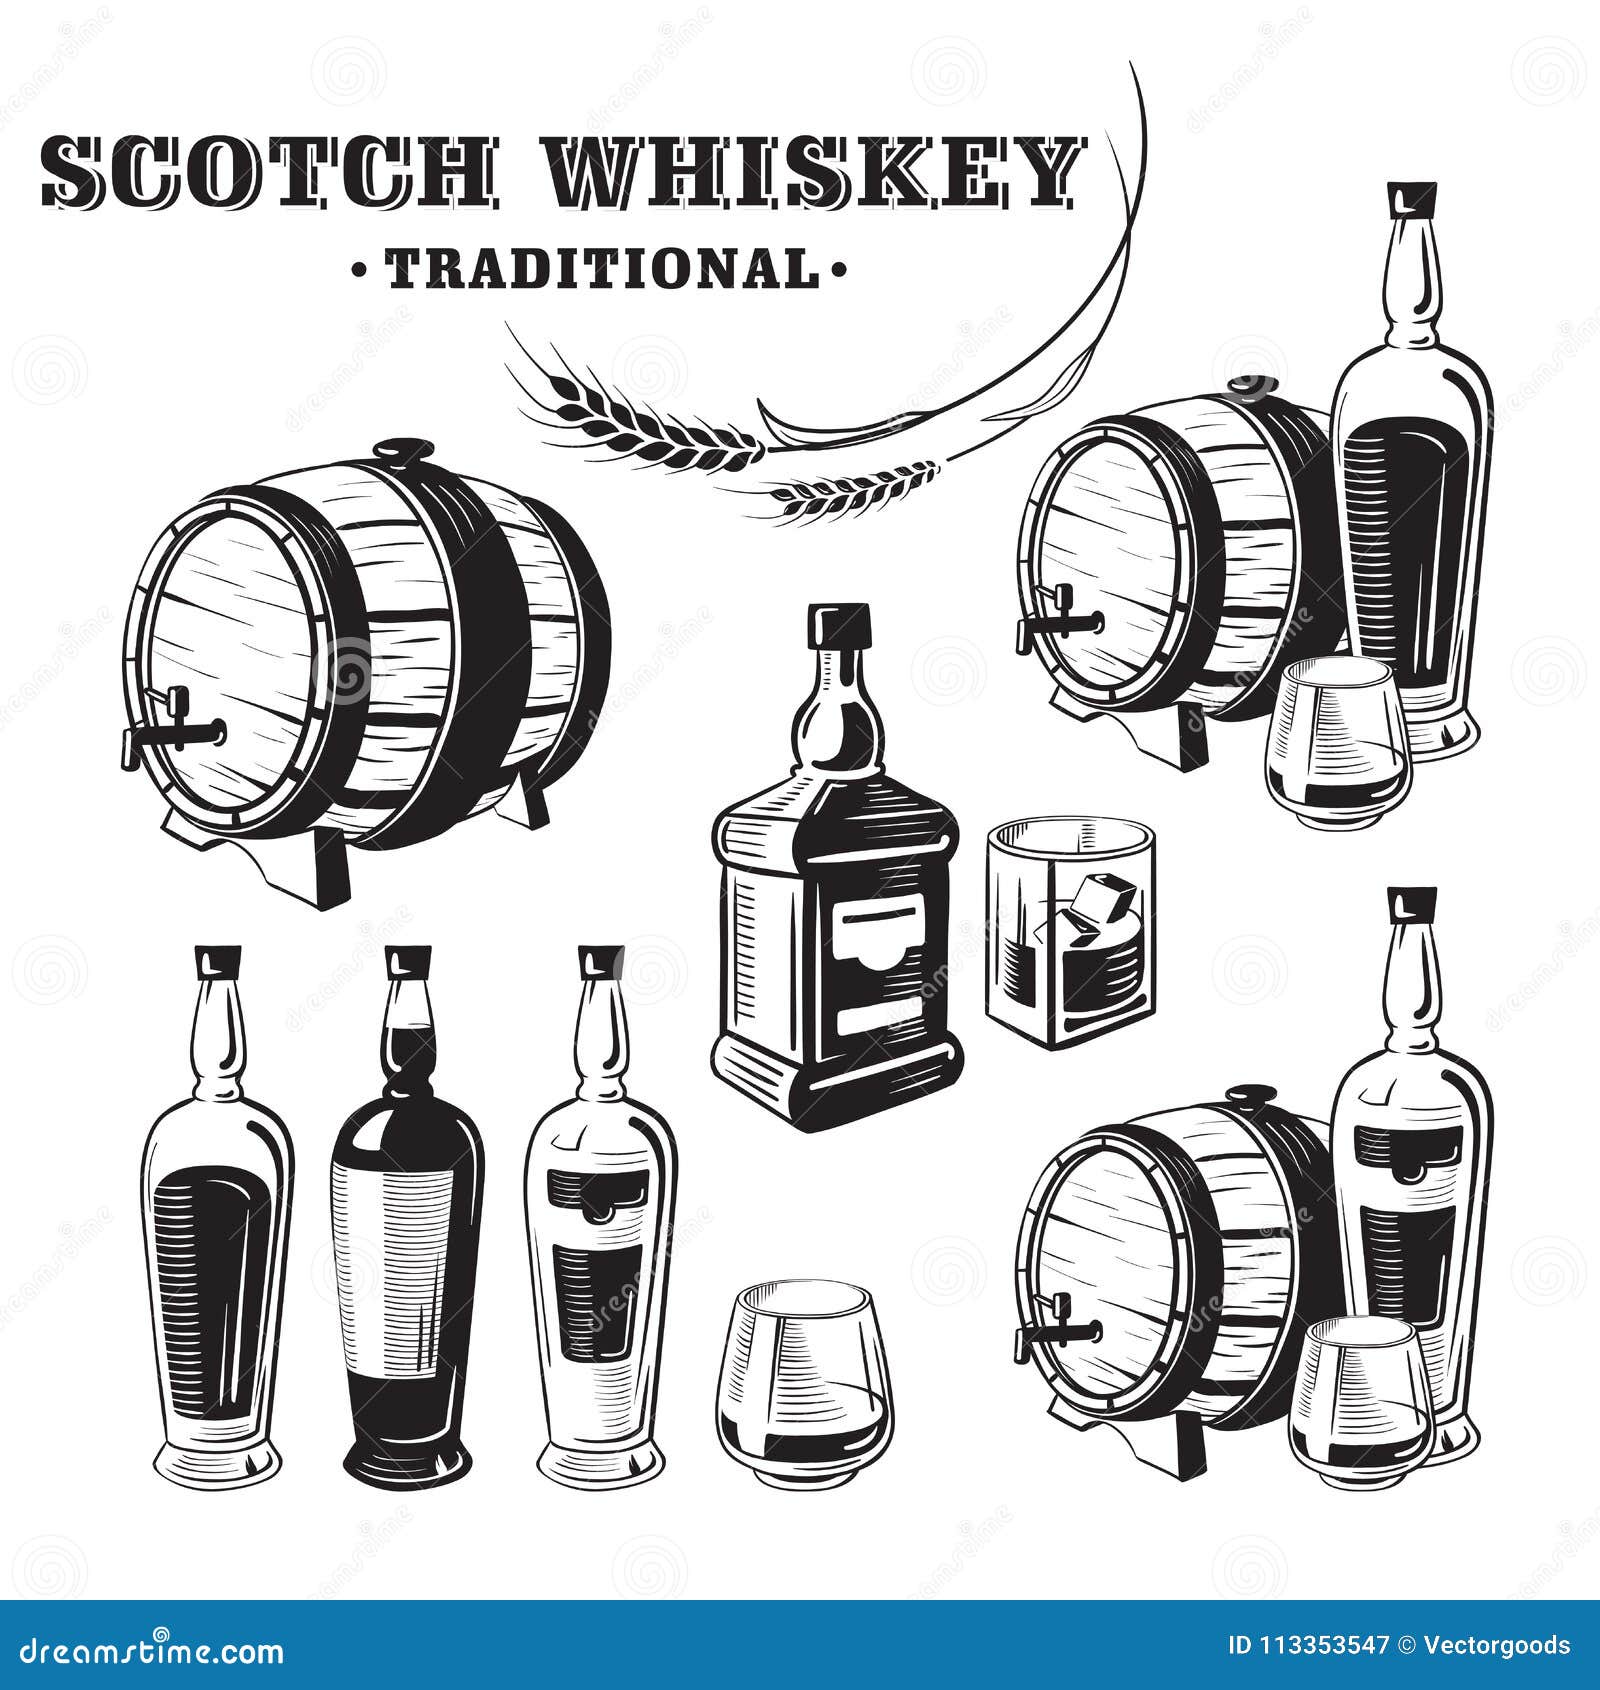 Whiskey bottle and glass promo ad banner poster Vector Image